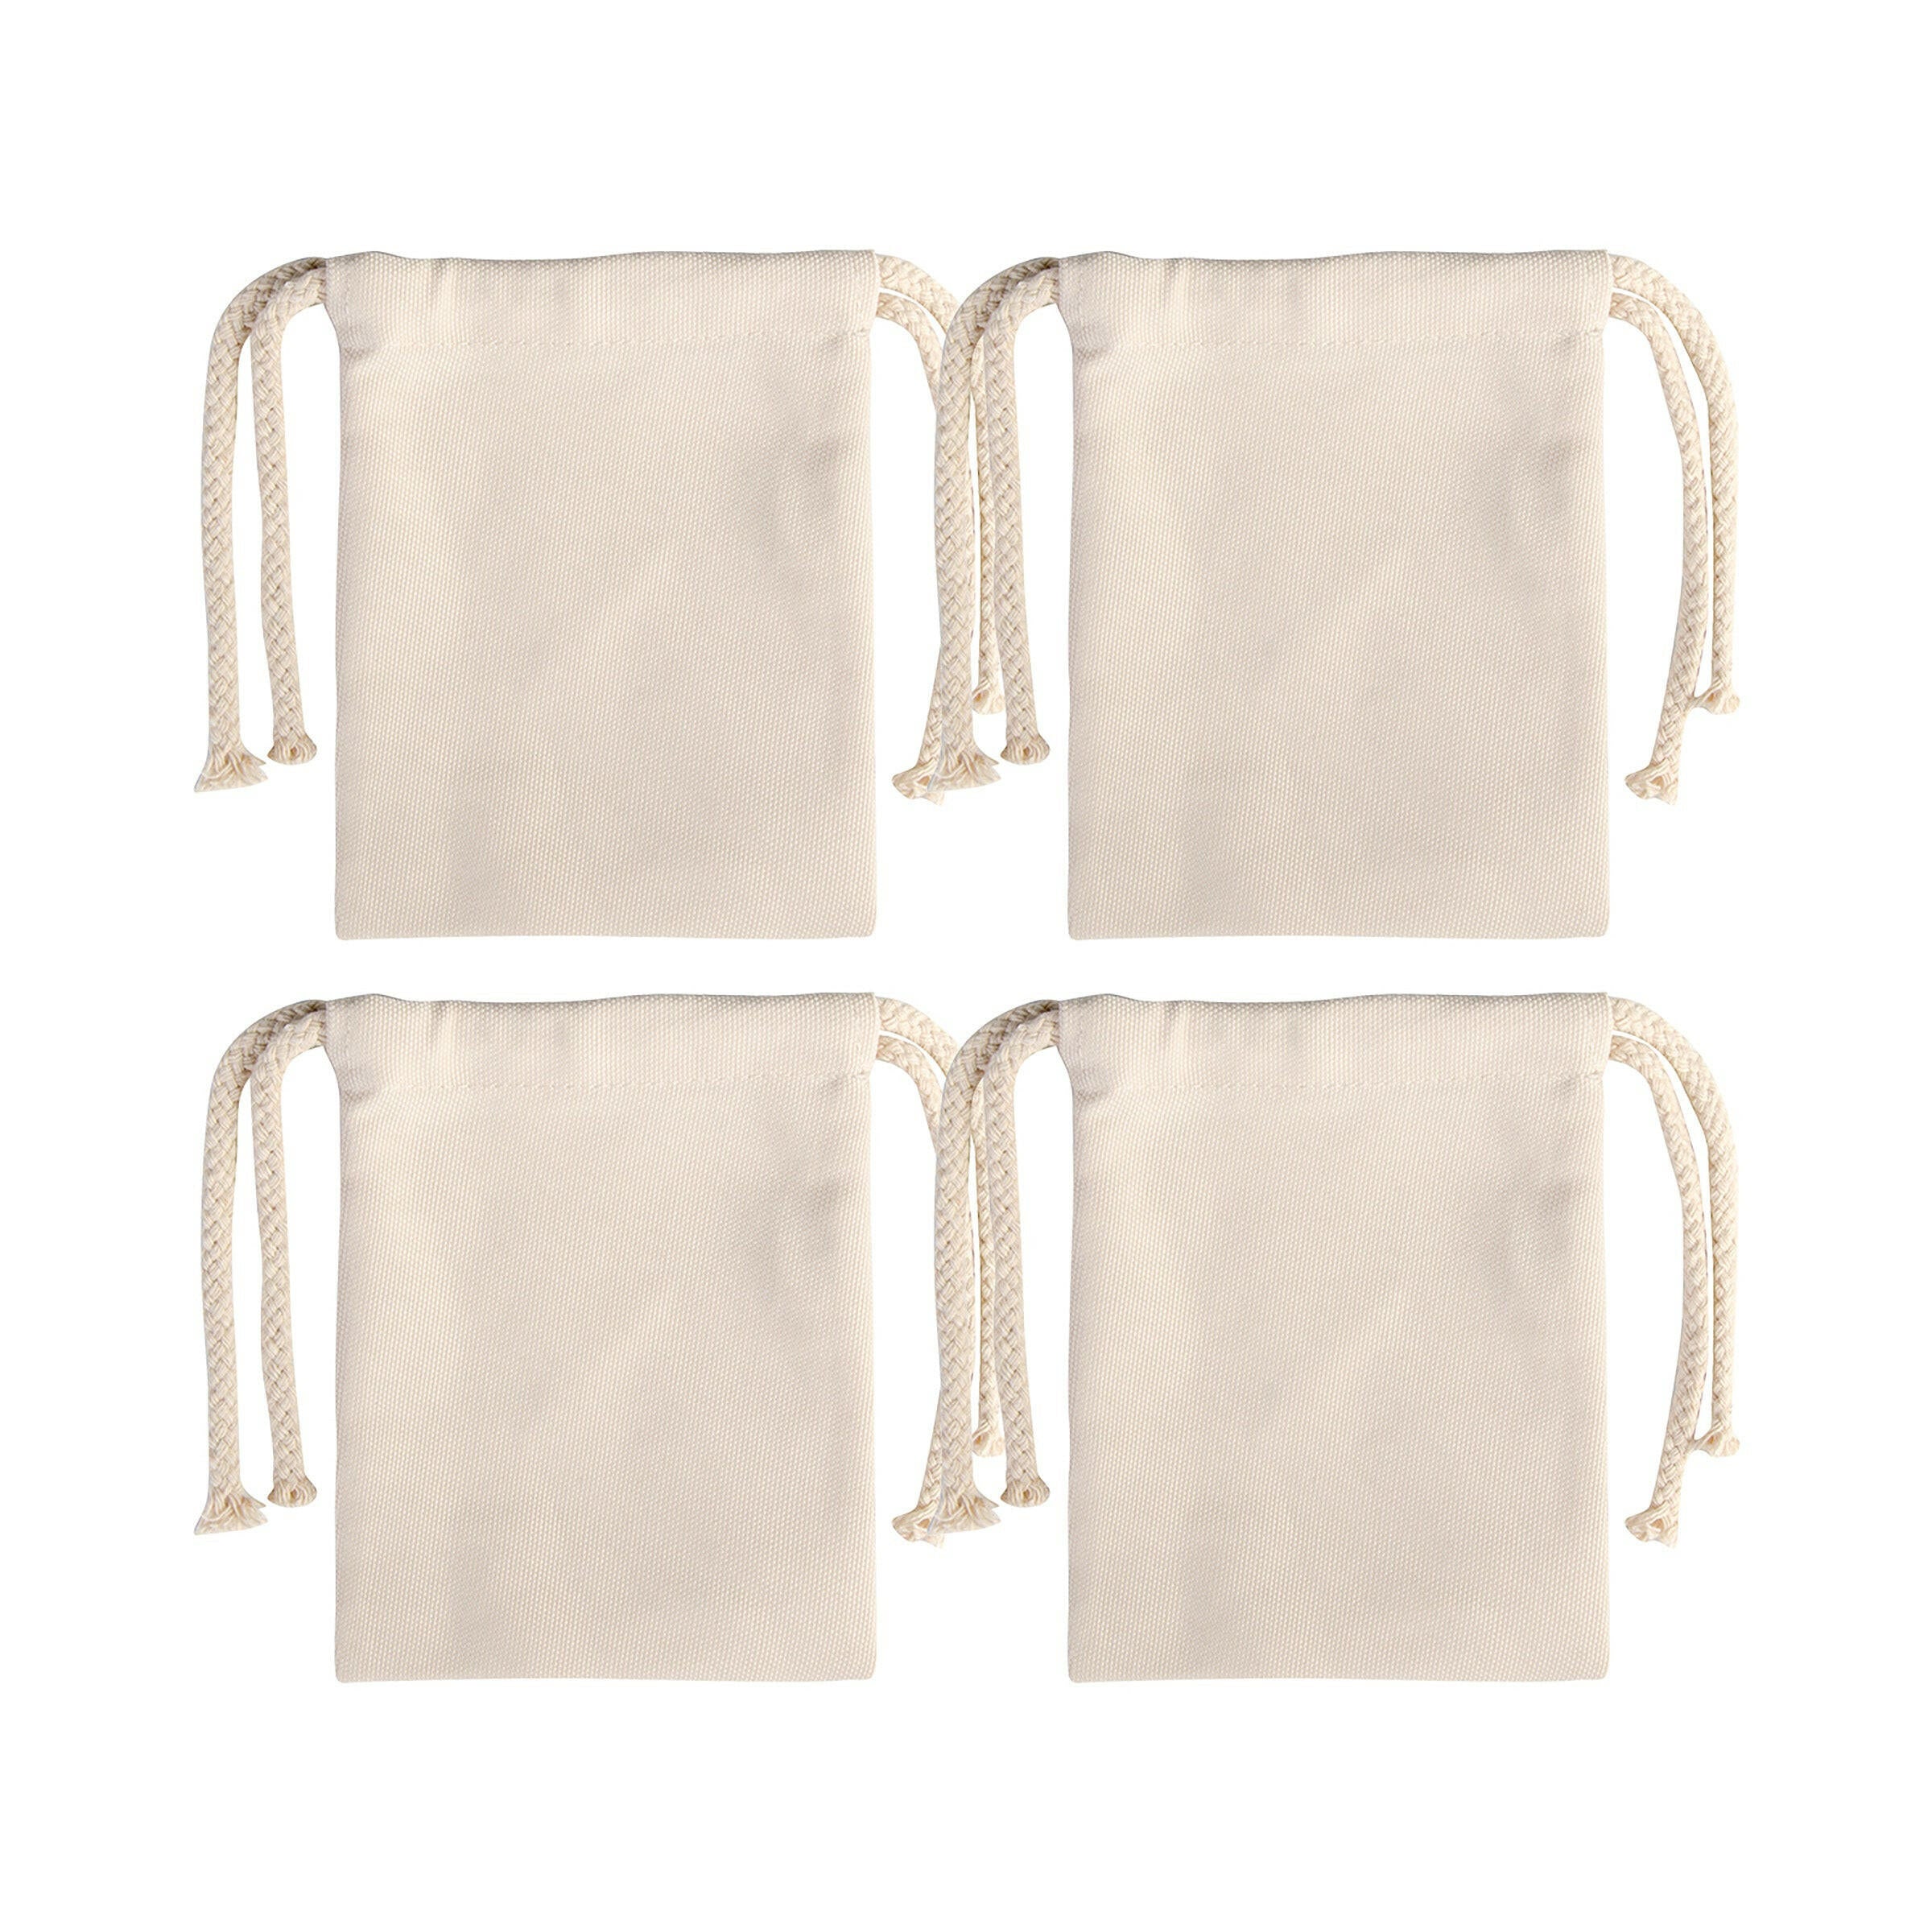 Sublimation Drawstring Gift Bags - 4 Pack.